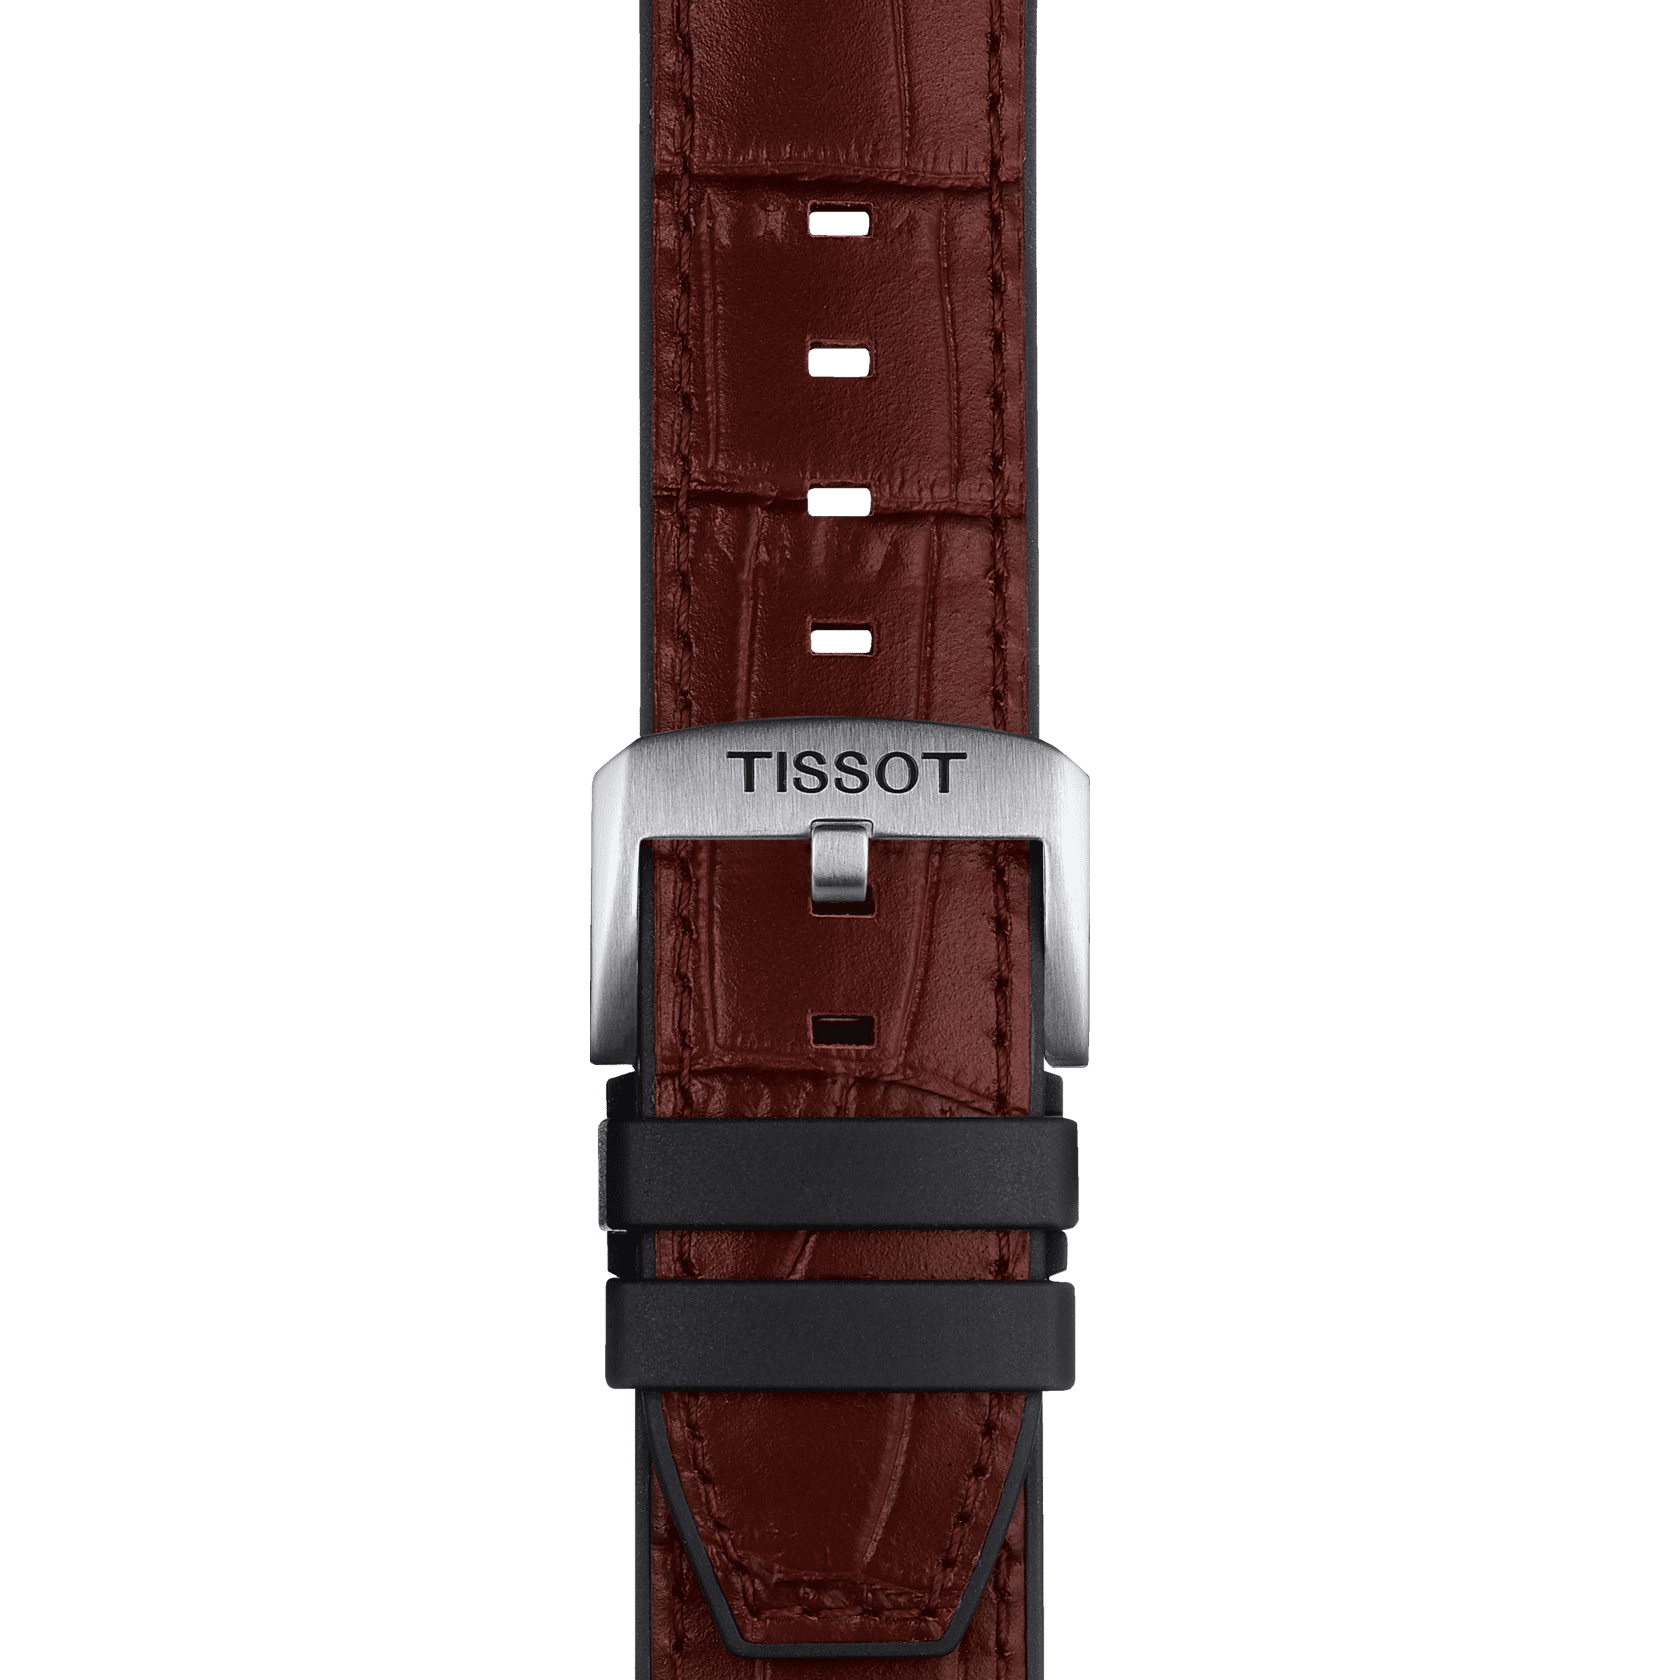 Tissot official brown leather and rubber parts strap lugs 22 mm